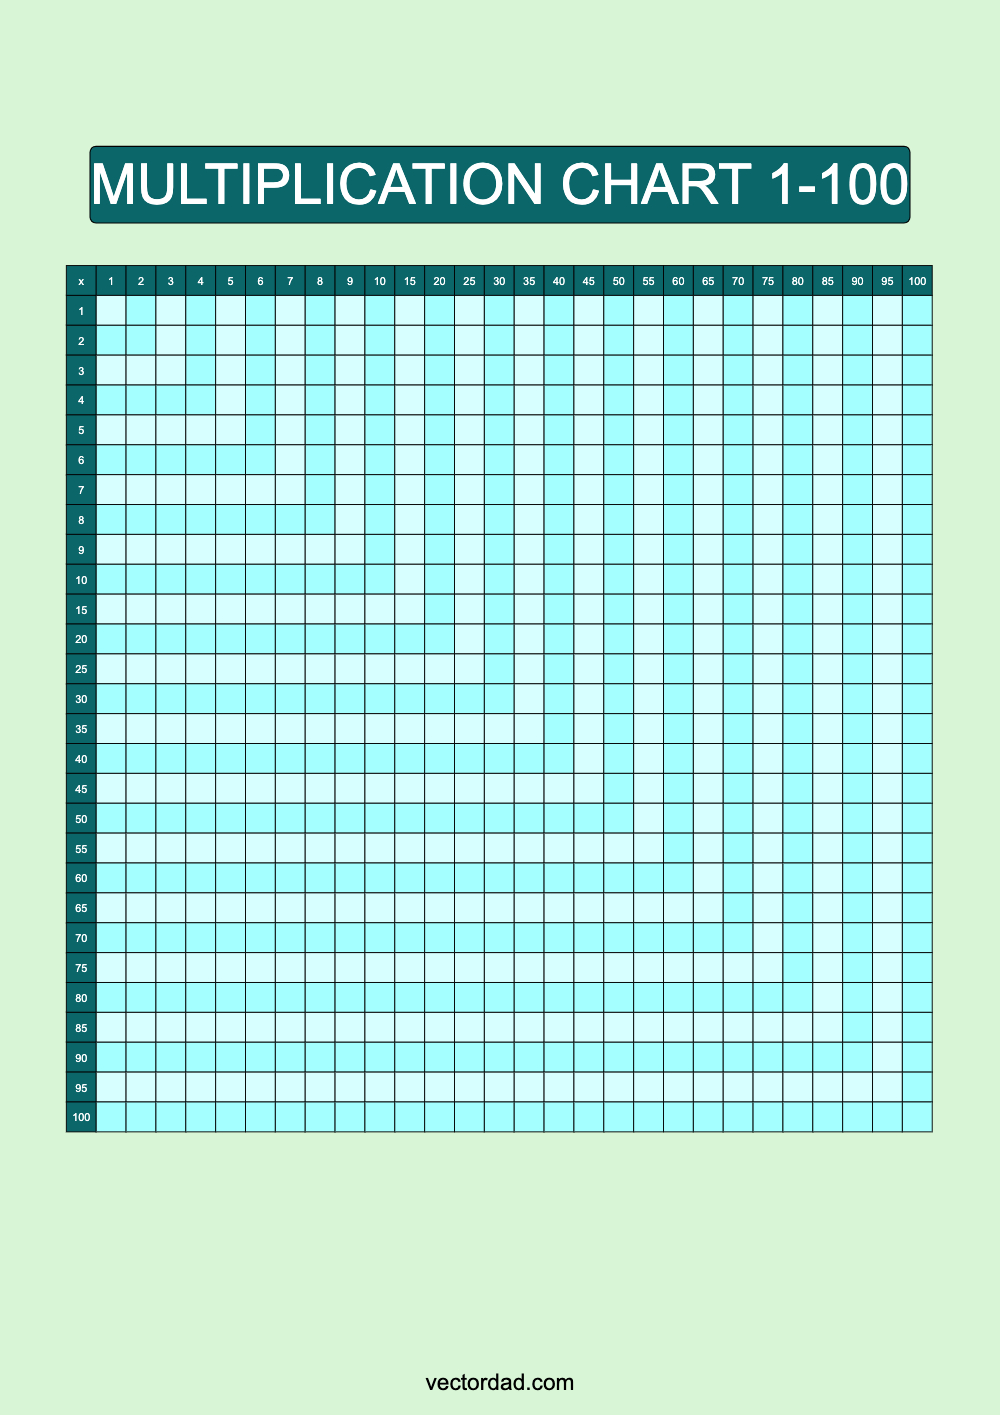 Blank Blue Lagoon Multiplication Grid Chart Printable 1 to 100 portrait Free, high quality, times table, sheet, pdf, svg, png, jpeg, svg, png, jpeg, 3rd grade, 4th grade, 5th grade, template, print, download, online, vertical